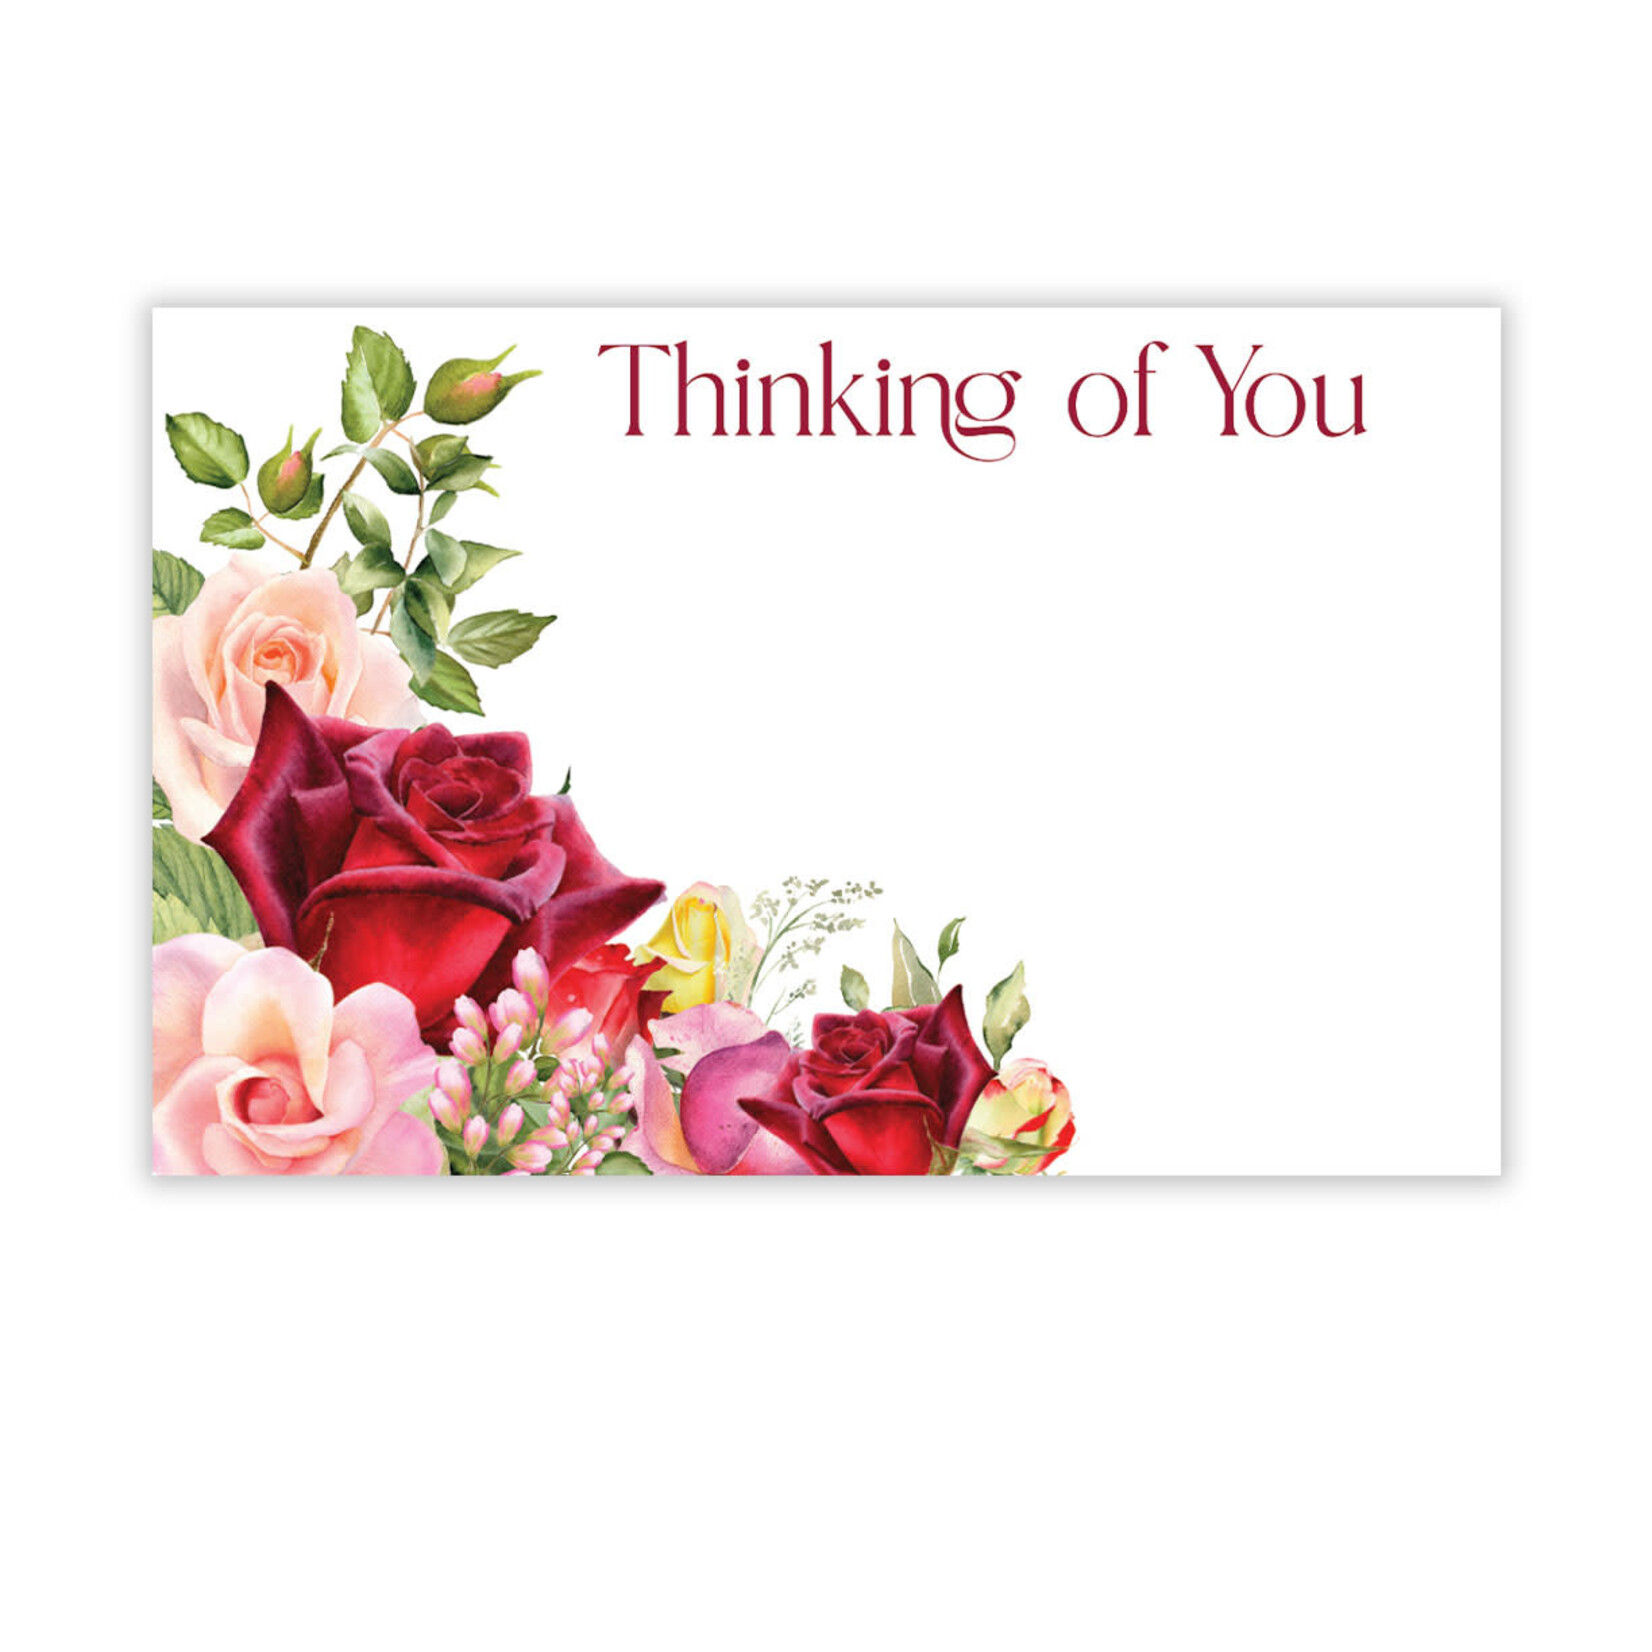 3 1/2″ x 2 1/4″ "THINKING OF YOU" CAPRI ENCLOSURE CARDS RED AND PINK ROSES (FOILED)